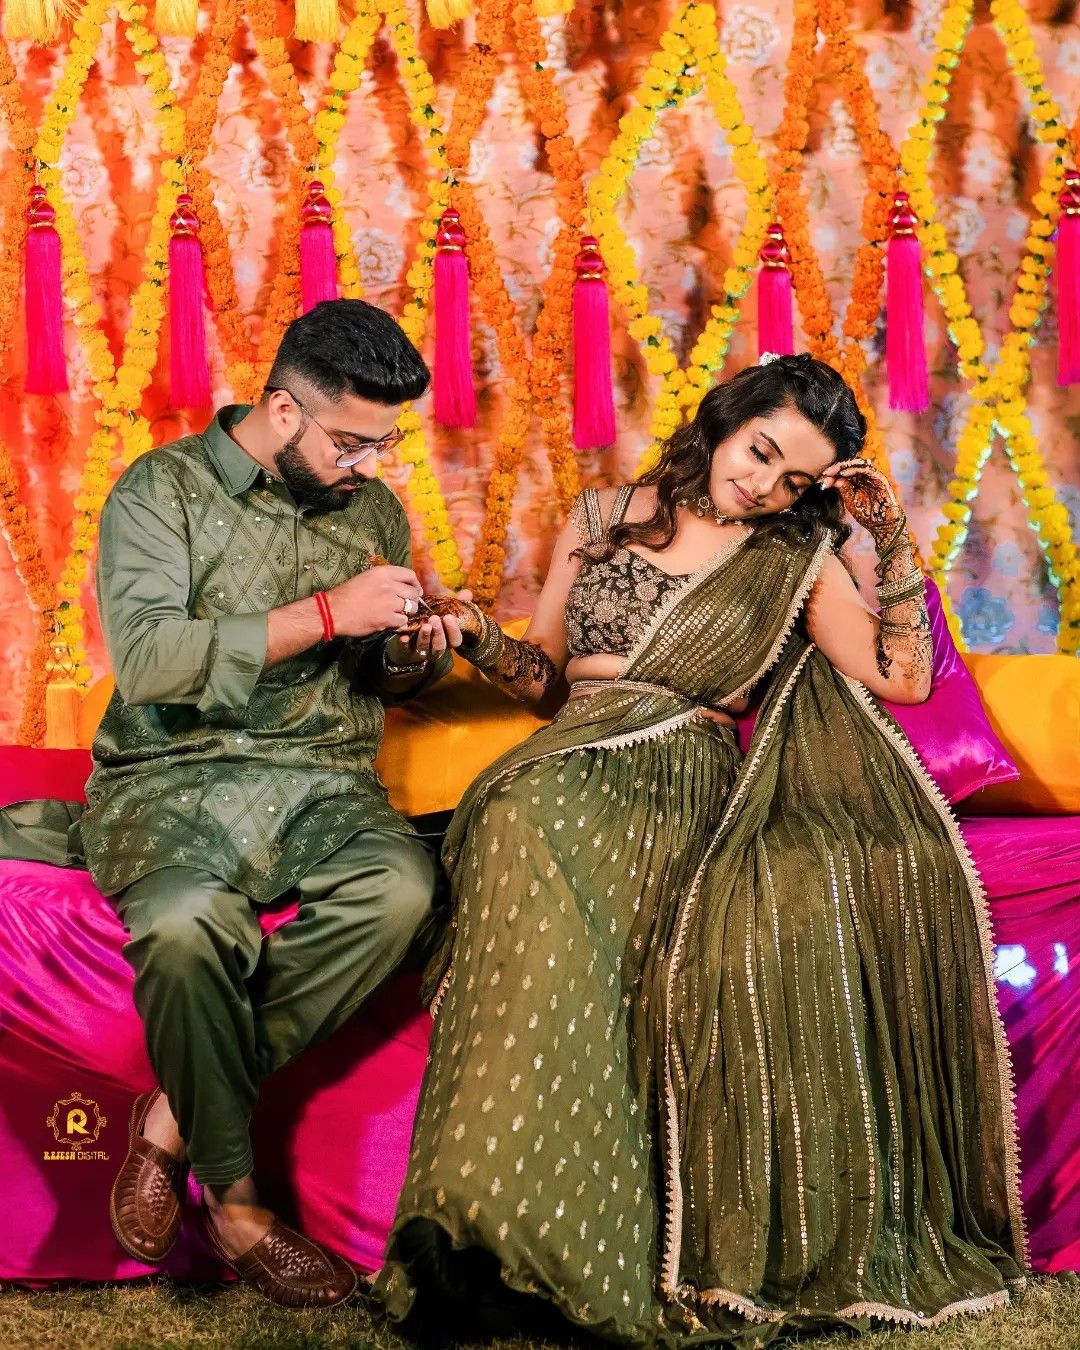 fun mehndi pose for bride with groom